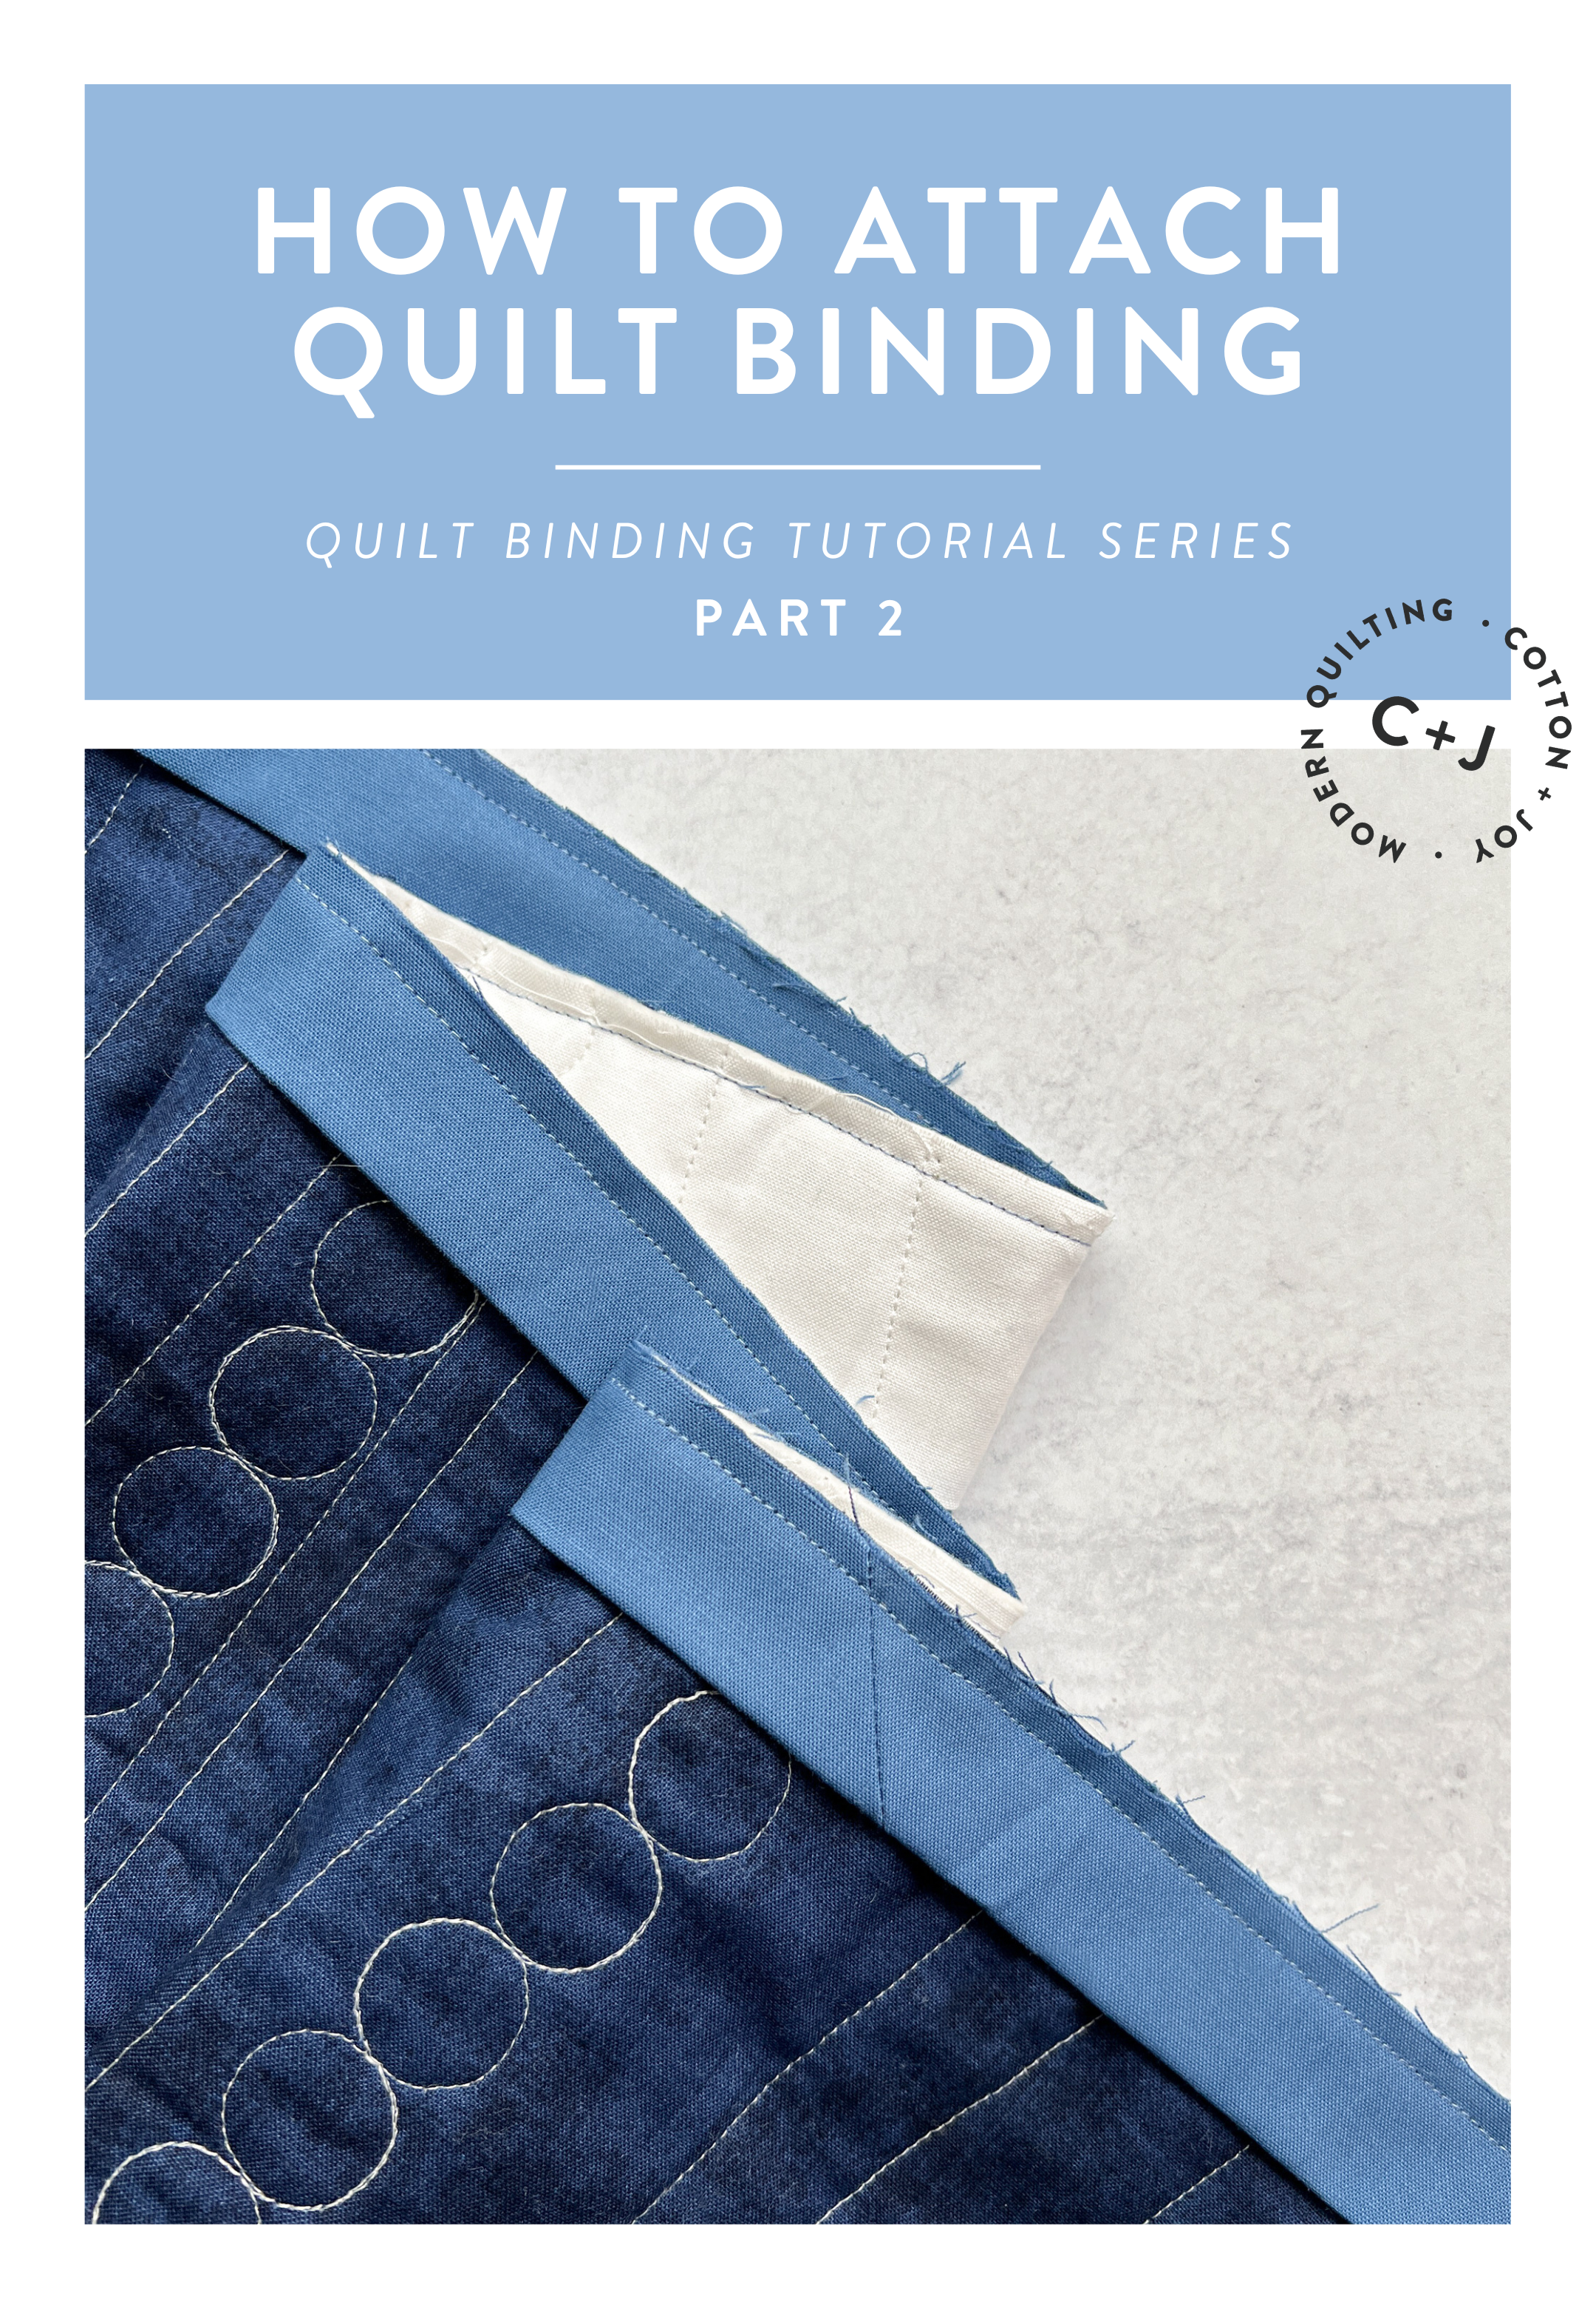 Making of Quilt Binding by Dint of Sewing Quilting Clips by Using Sewing  Machine Stock Photo - Image of handmade, craft: 189516350